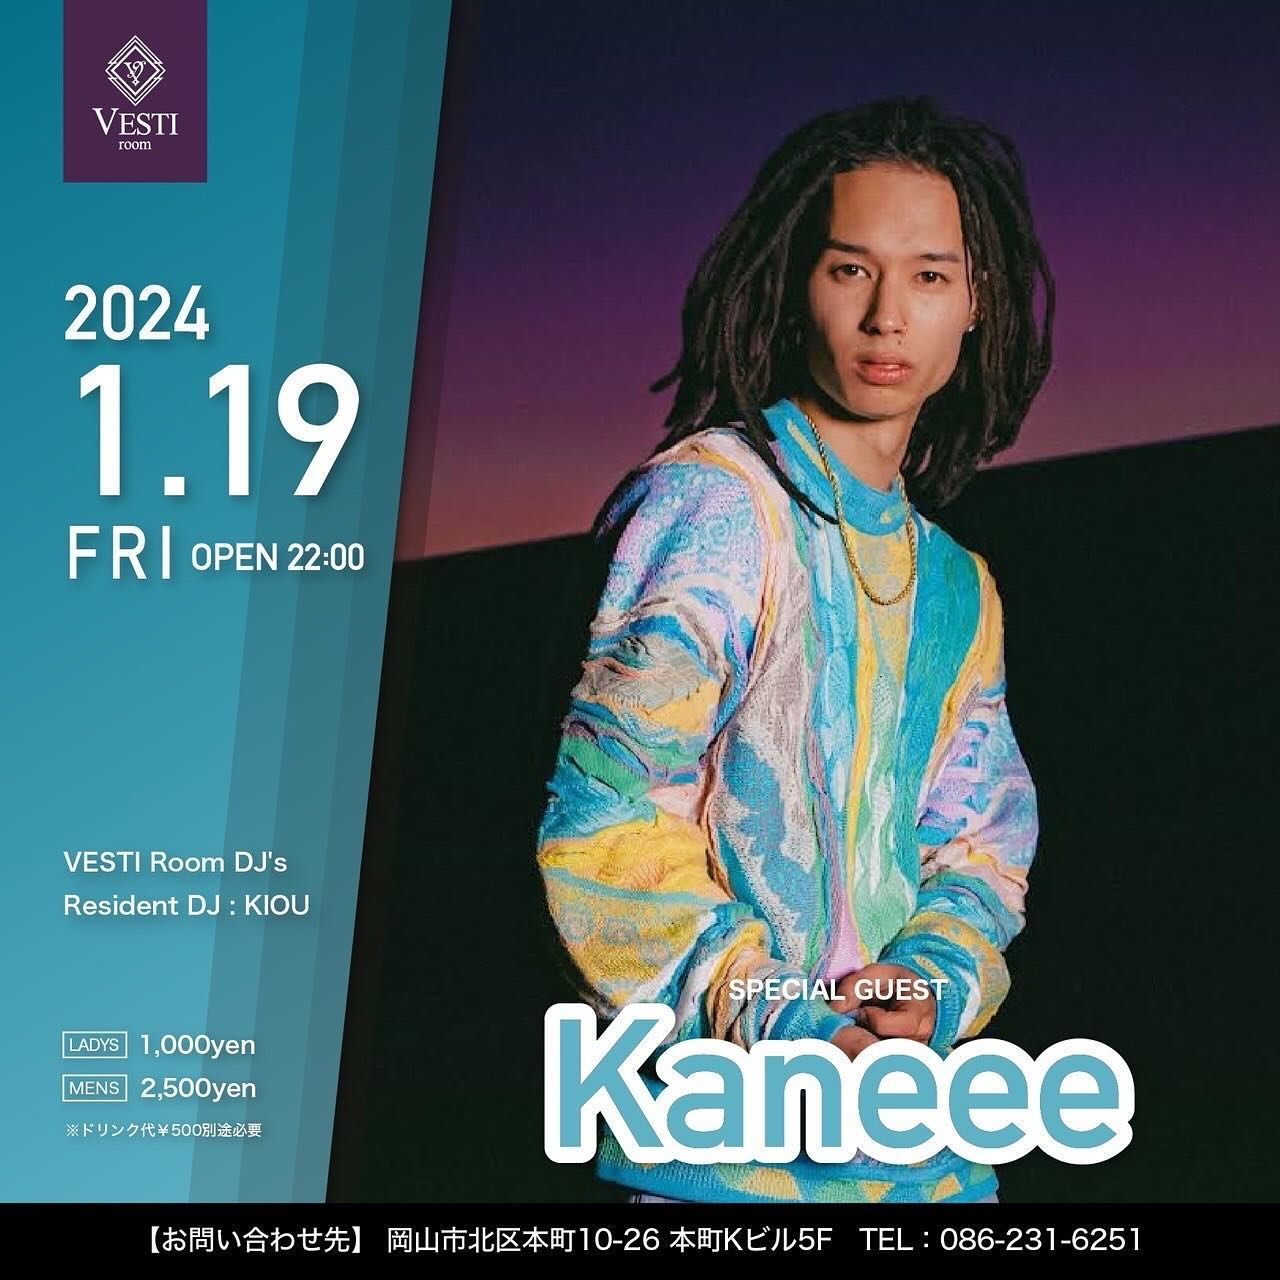 SPECIAL GUEST : Kaneee